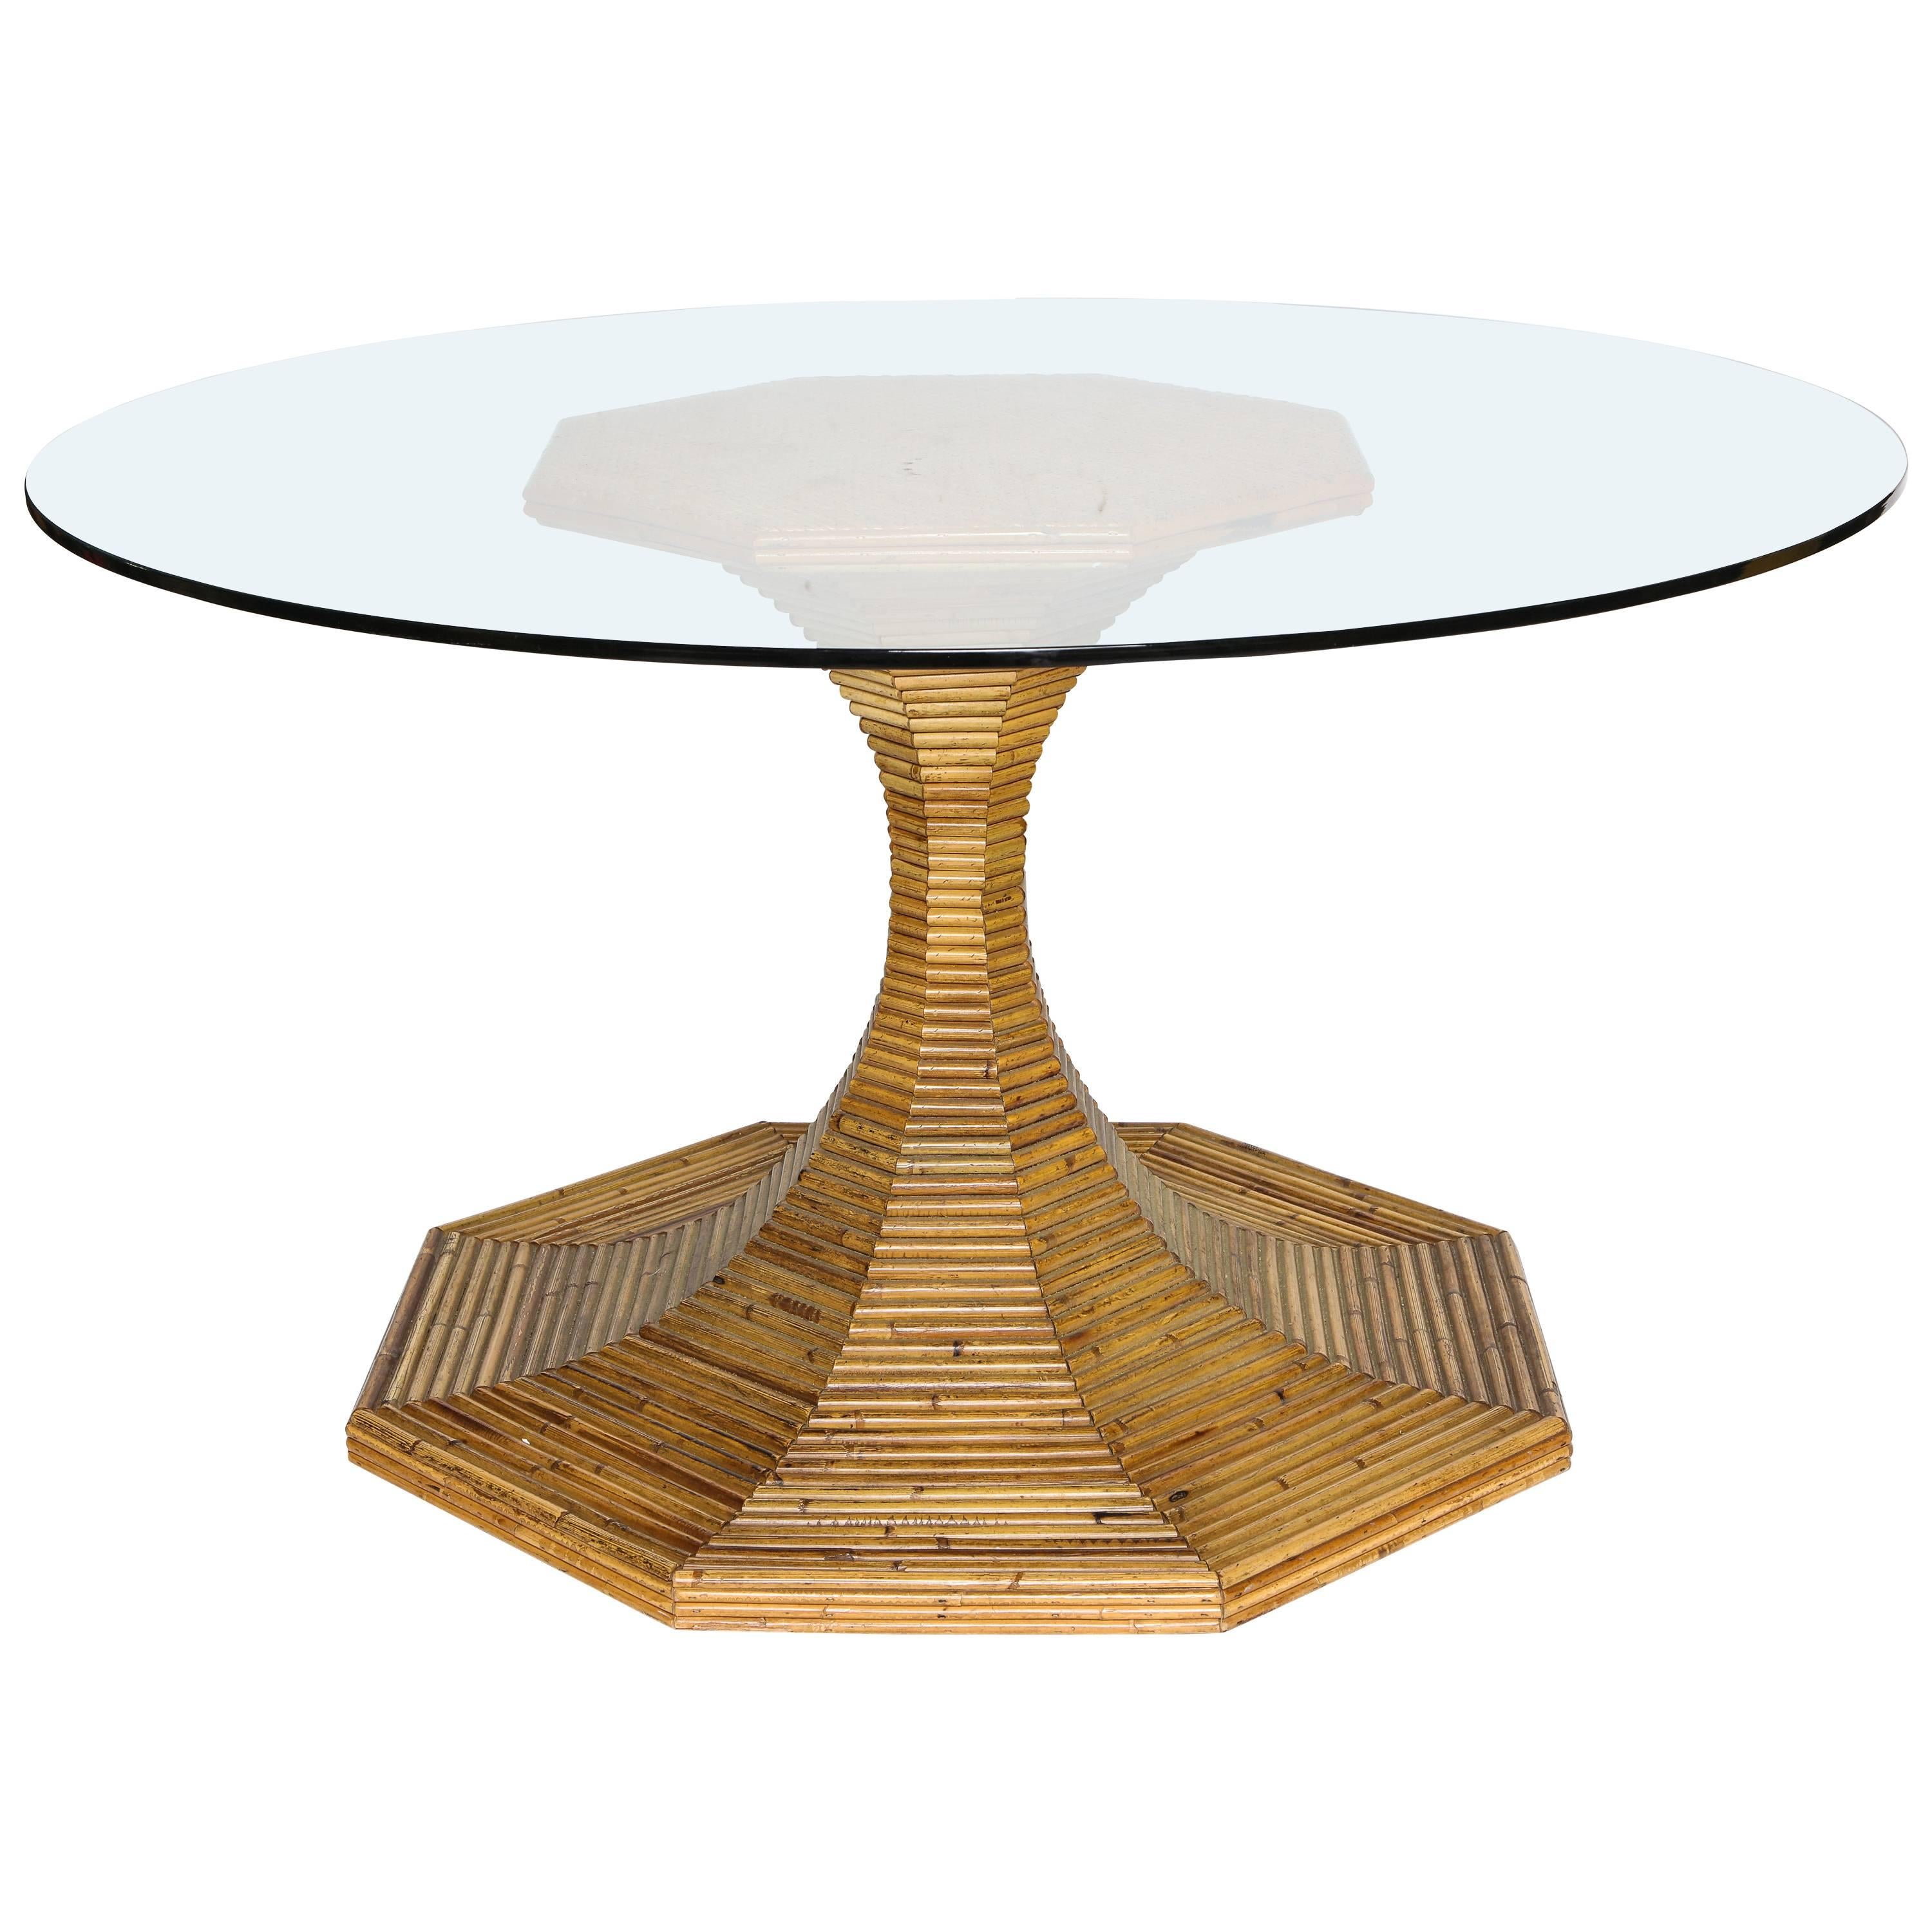 Elegant Vivai del Sud Rattan Bamboo Round Dining or Centre Table, Italy, 1970s